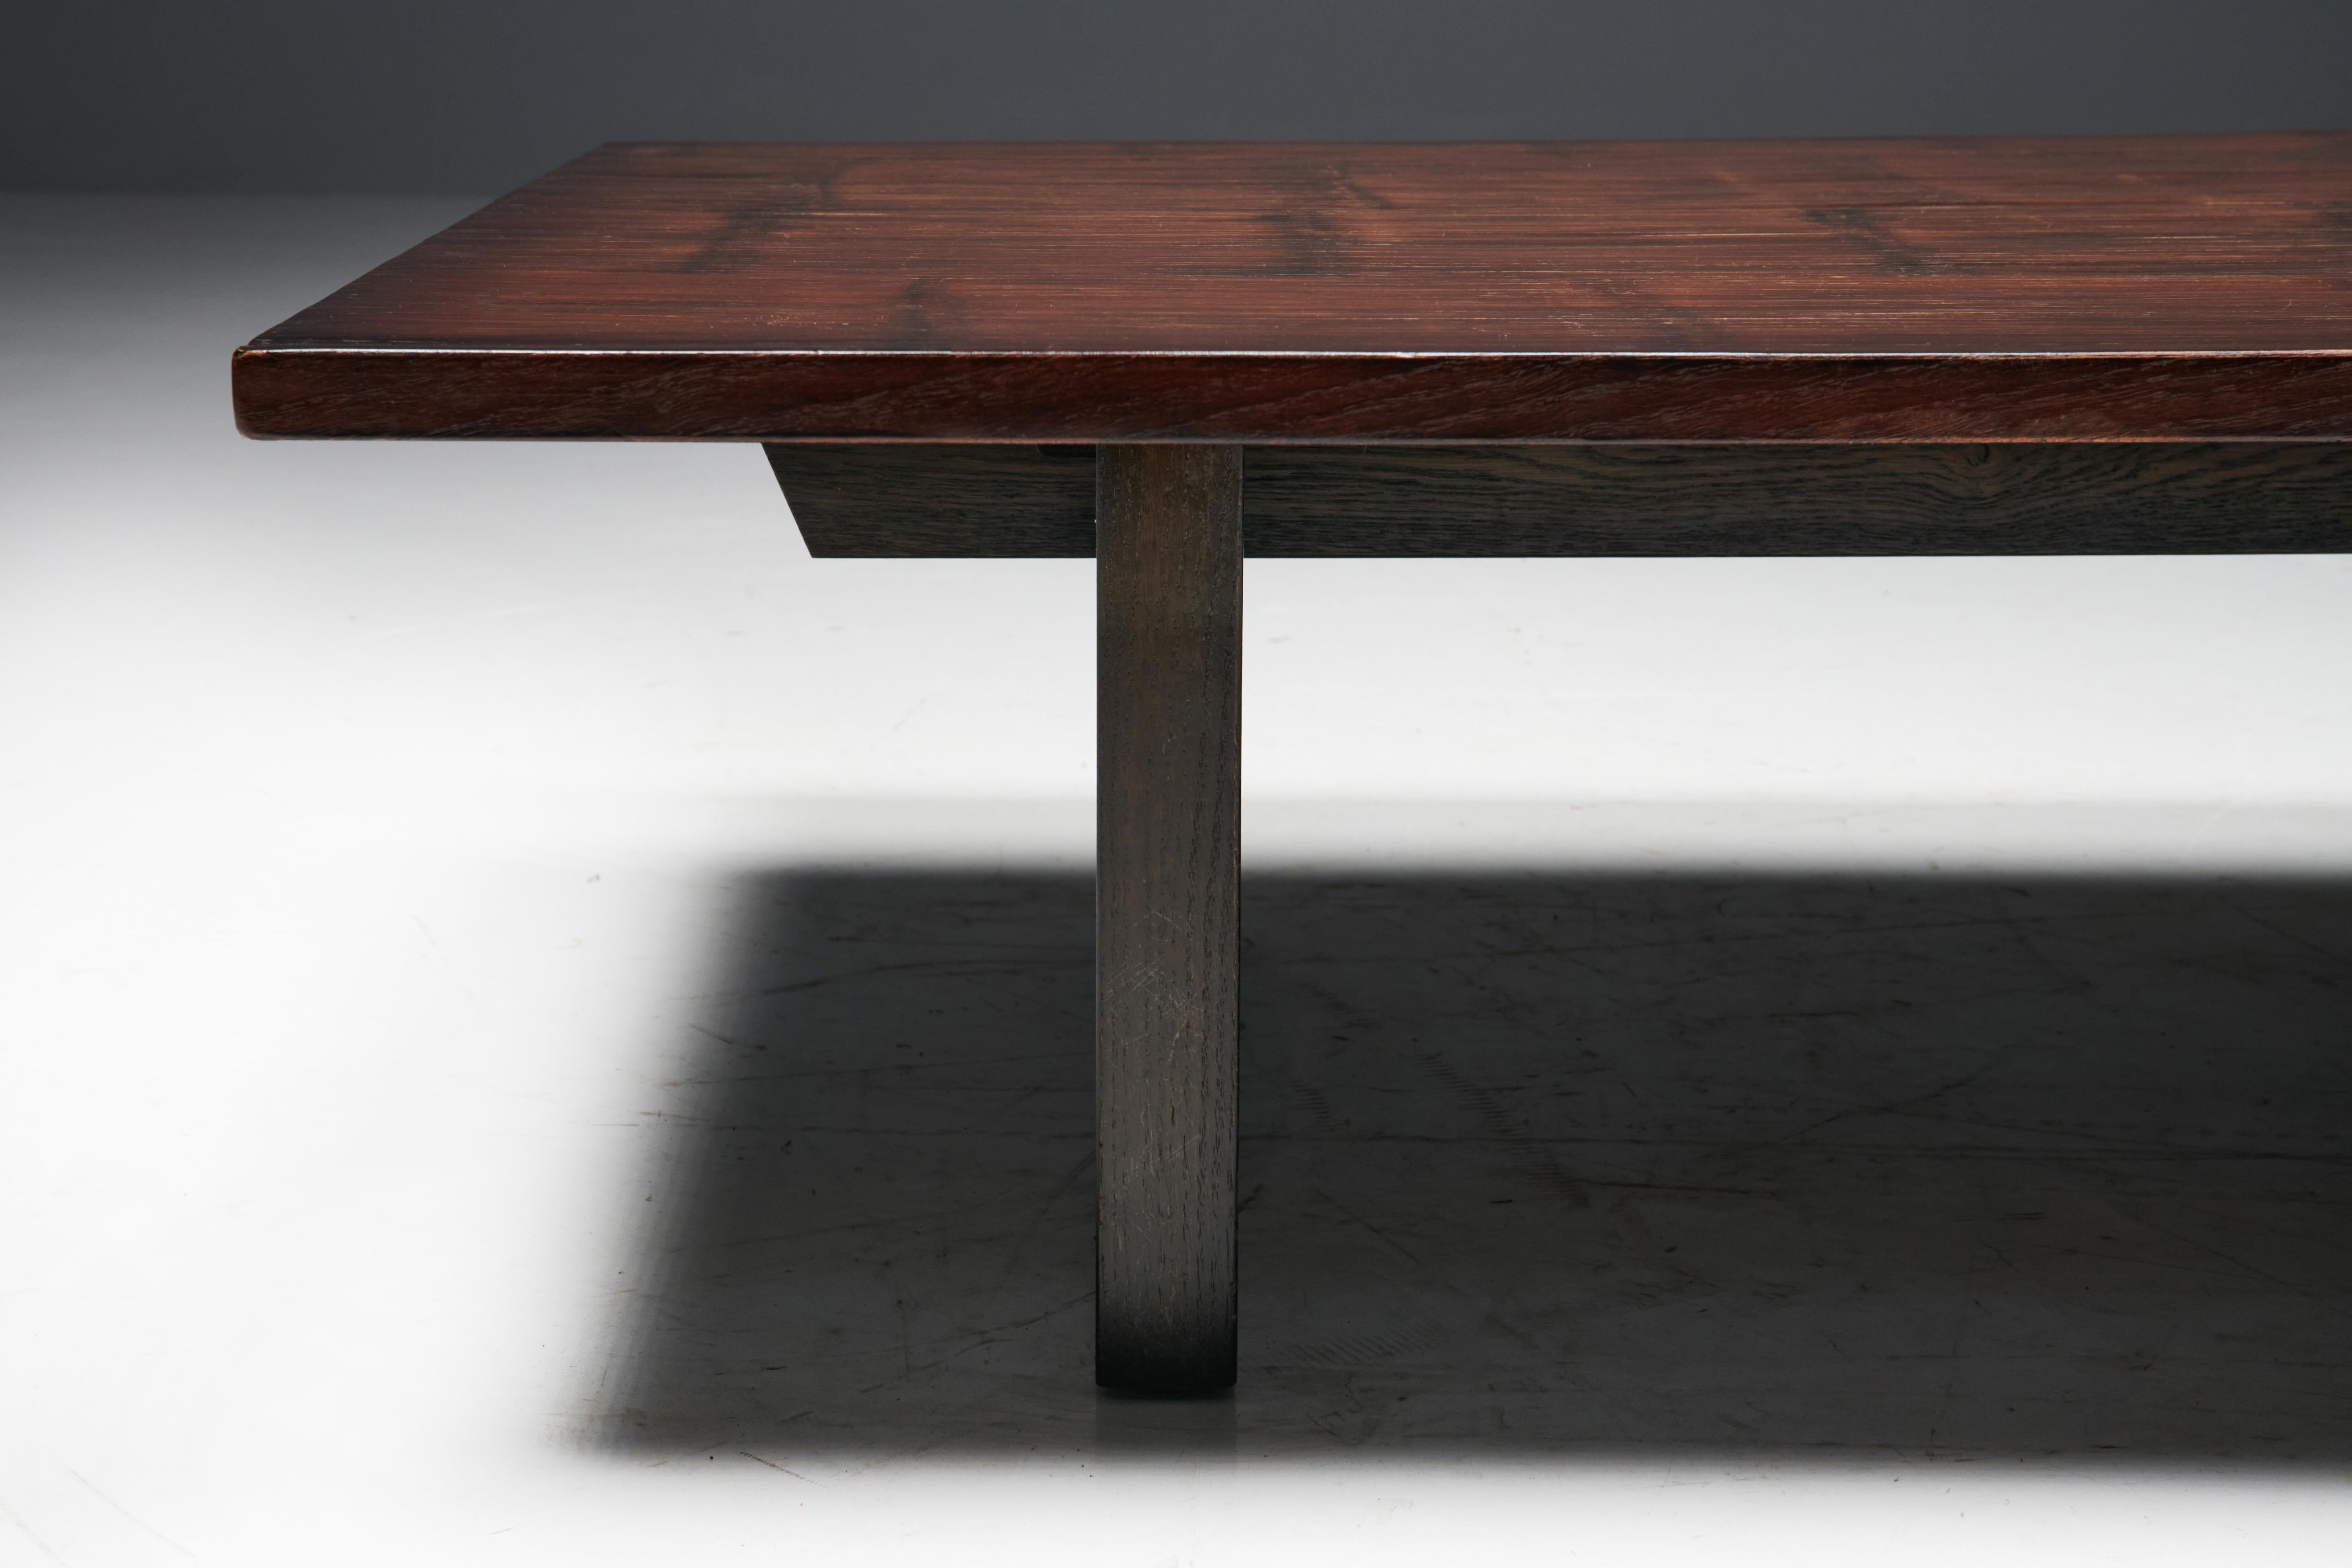 Late 20th Century Coffee Table by Axel Vervoordt in Wenge and Bamboo, Belgium, 1980s